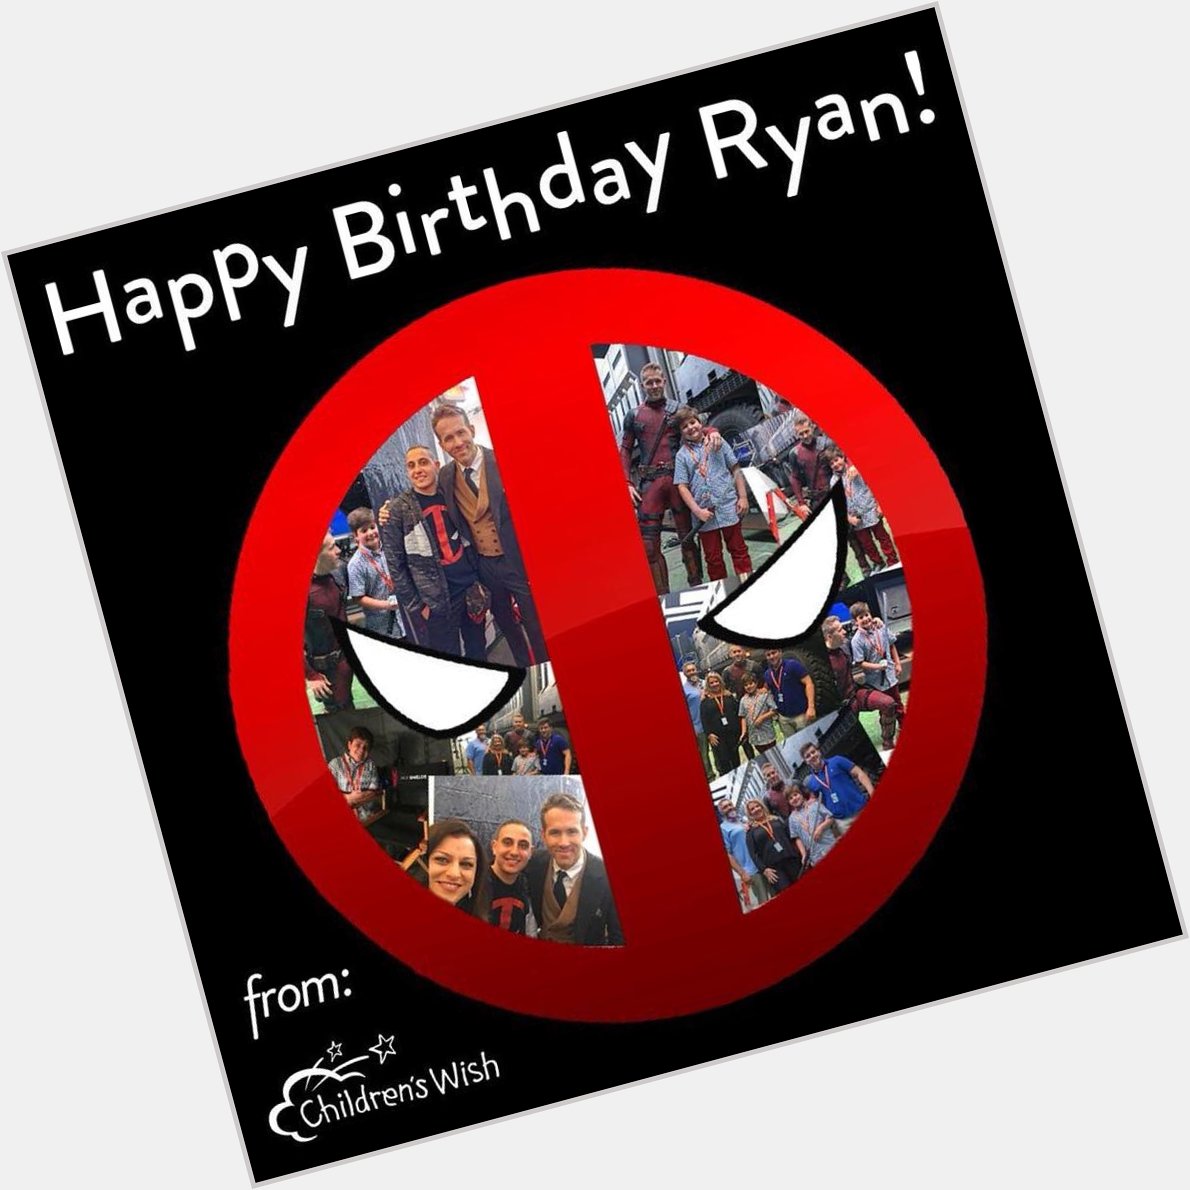   awesome happy birthday. Thank you for giving back Ryan Reynolds. 